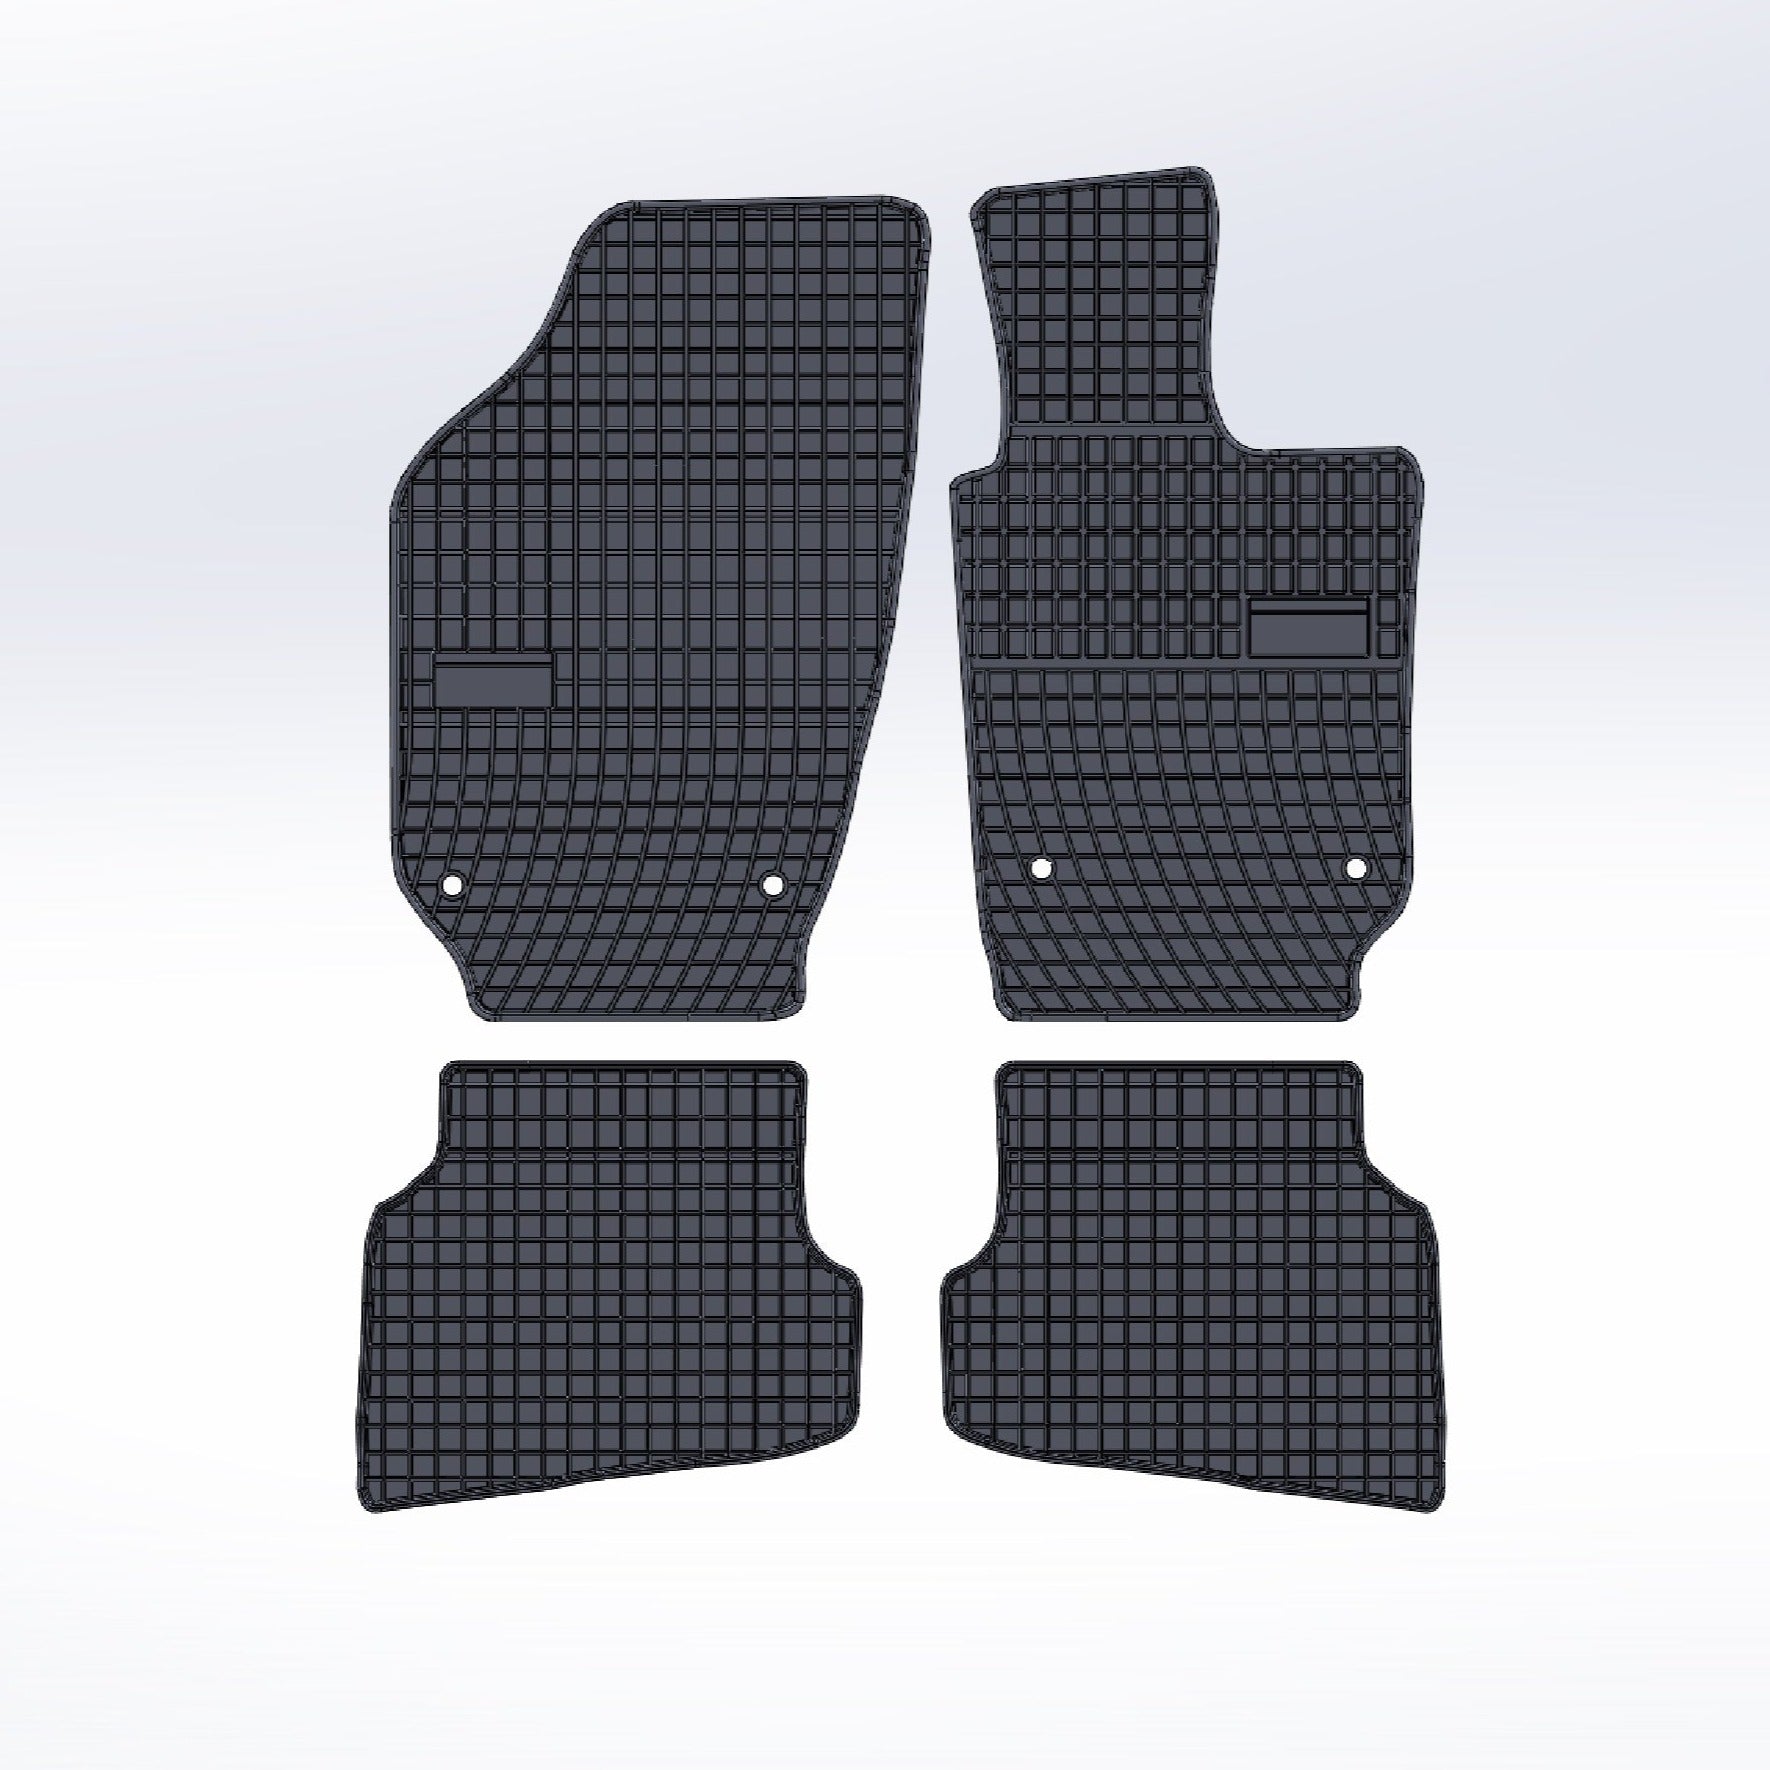 Volkswagen Polo 2009-2018 Moulded Rubber Car Mats - In Stock - £69.99